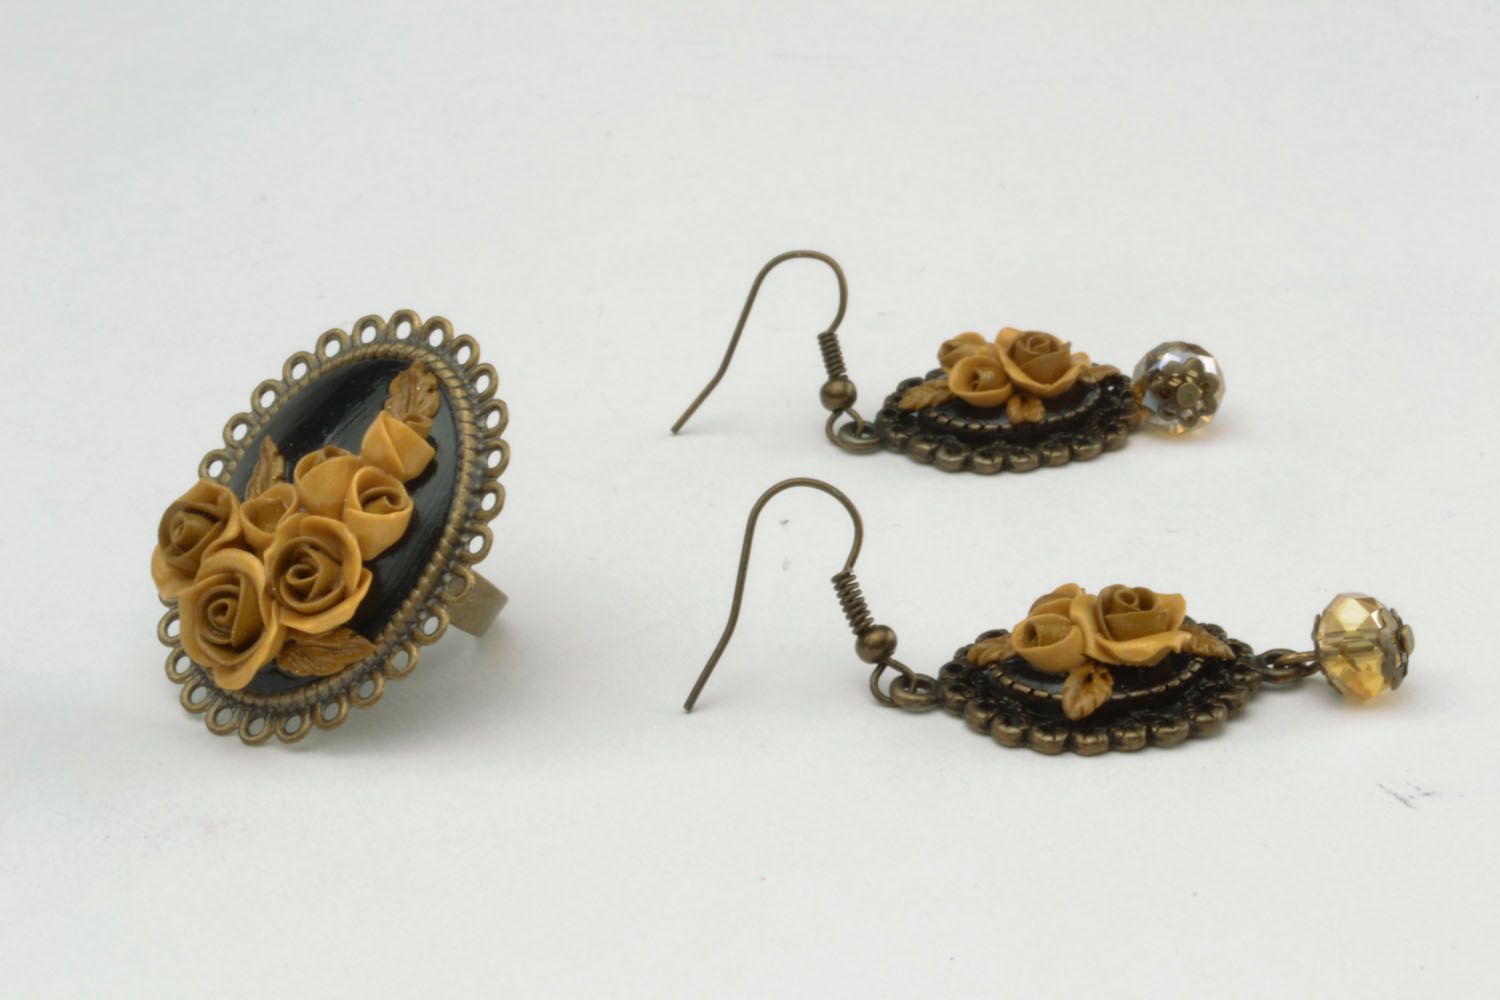 Homemade ring and earrings in vintage style photo 3